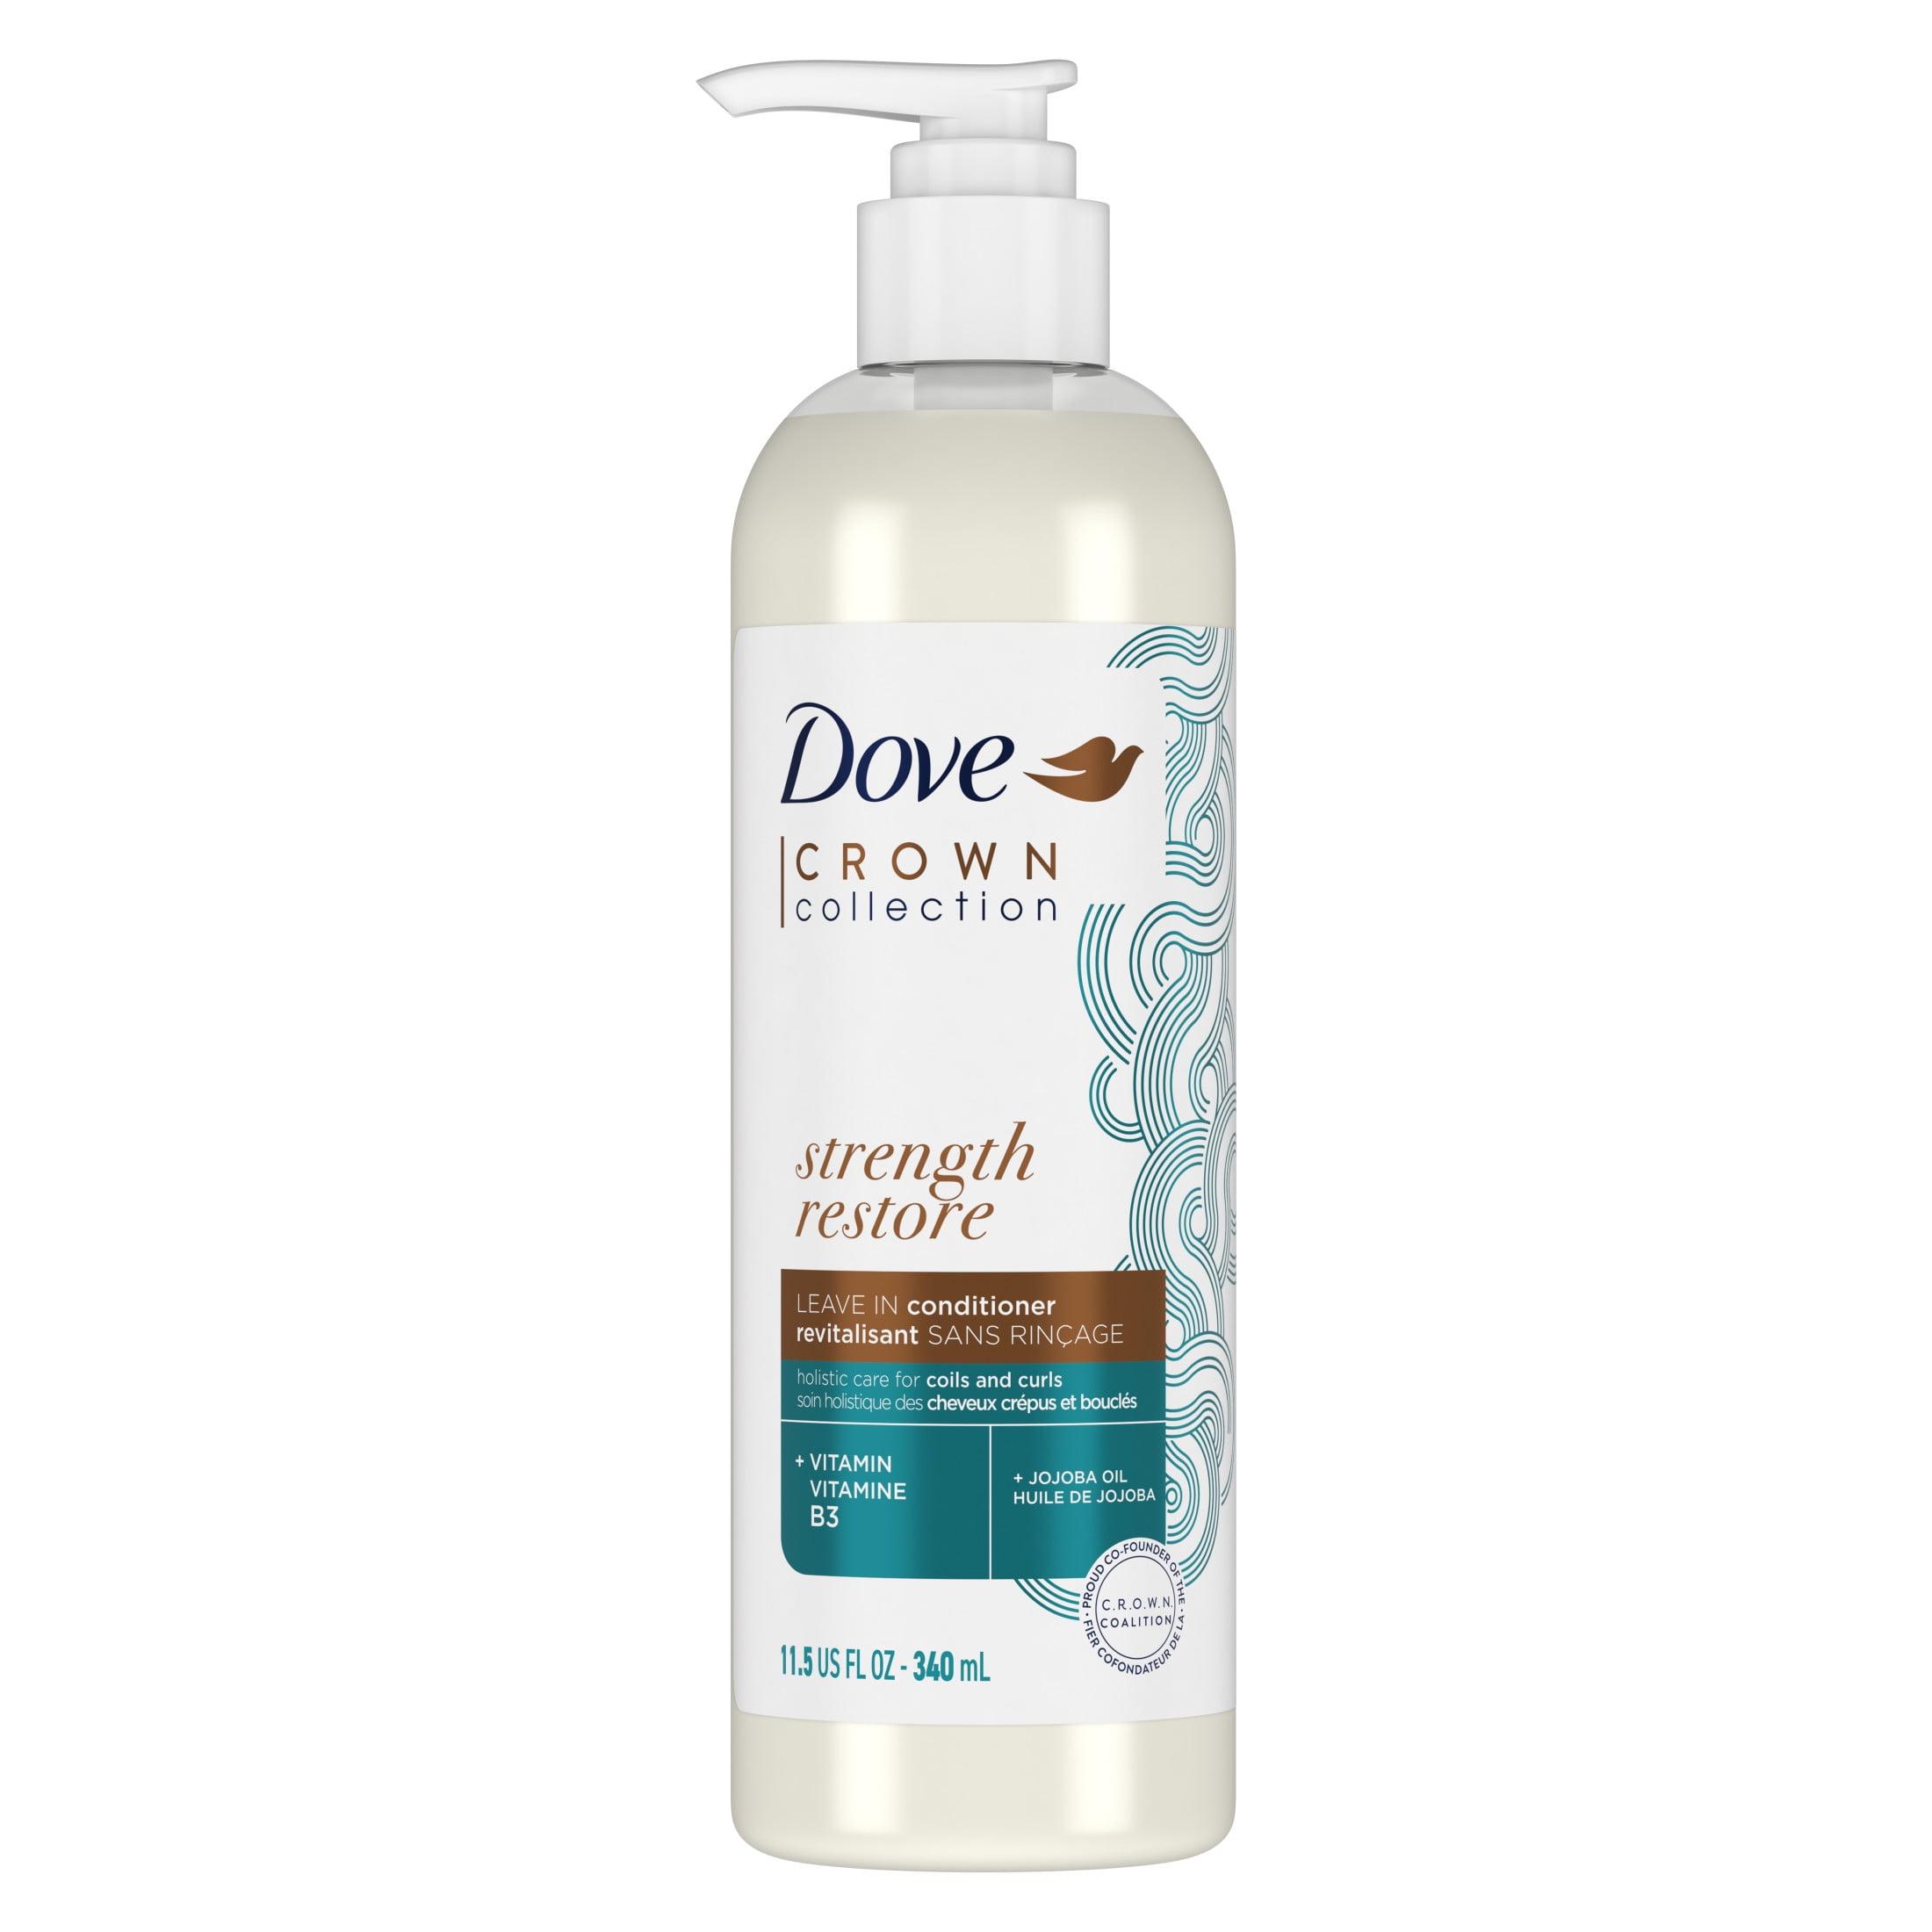 Dove Crown Collection Strength Restore Leave In Conditioner with Jojoba Oil, 11.5 fl oz - image 1 of 9